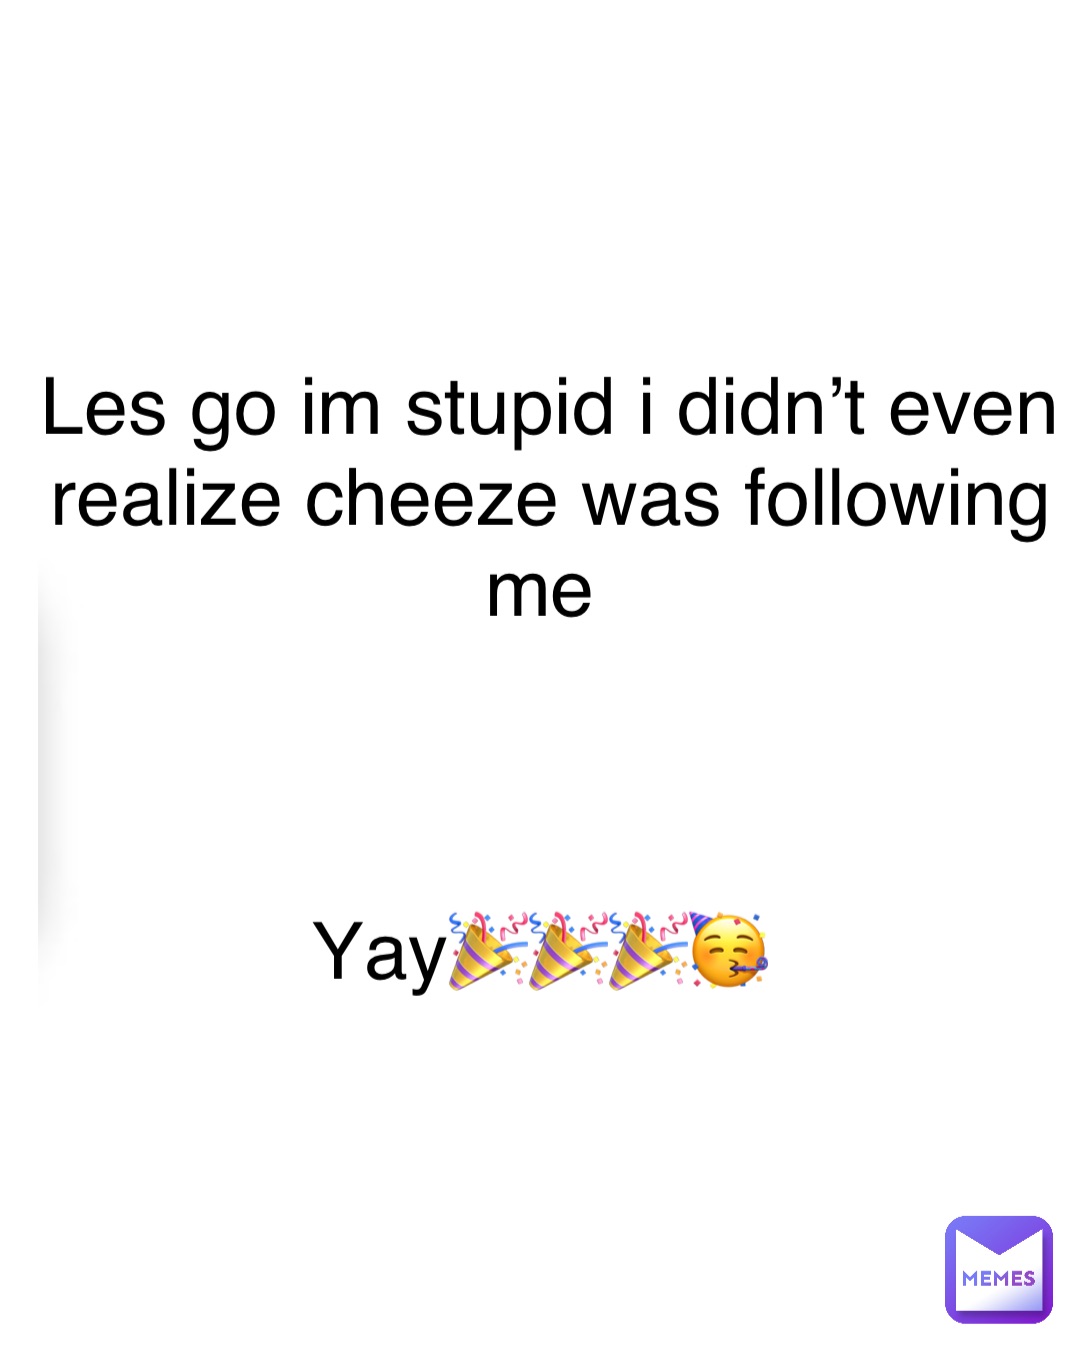 Double tap to edit Les go im stupid i didn’t even realize cheeze was following me



Yay🎉🎉🎉🥳